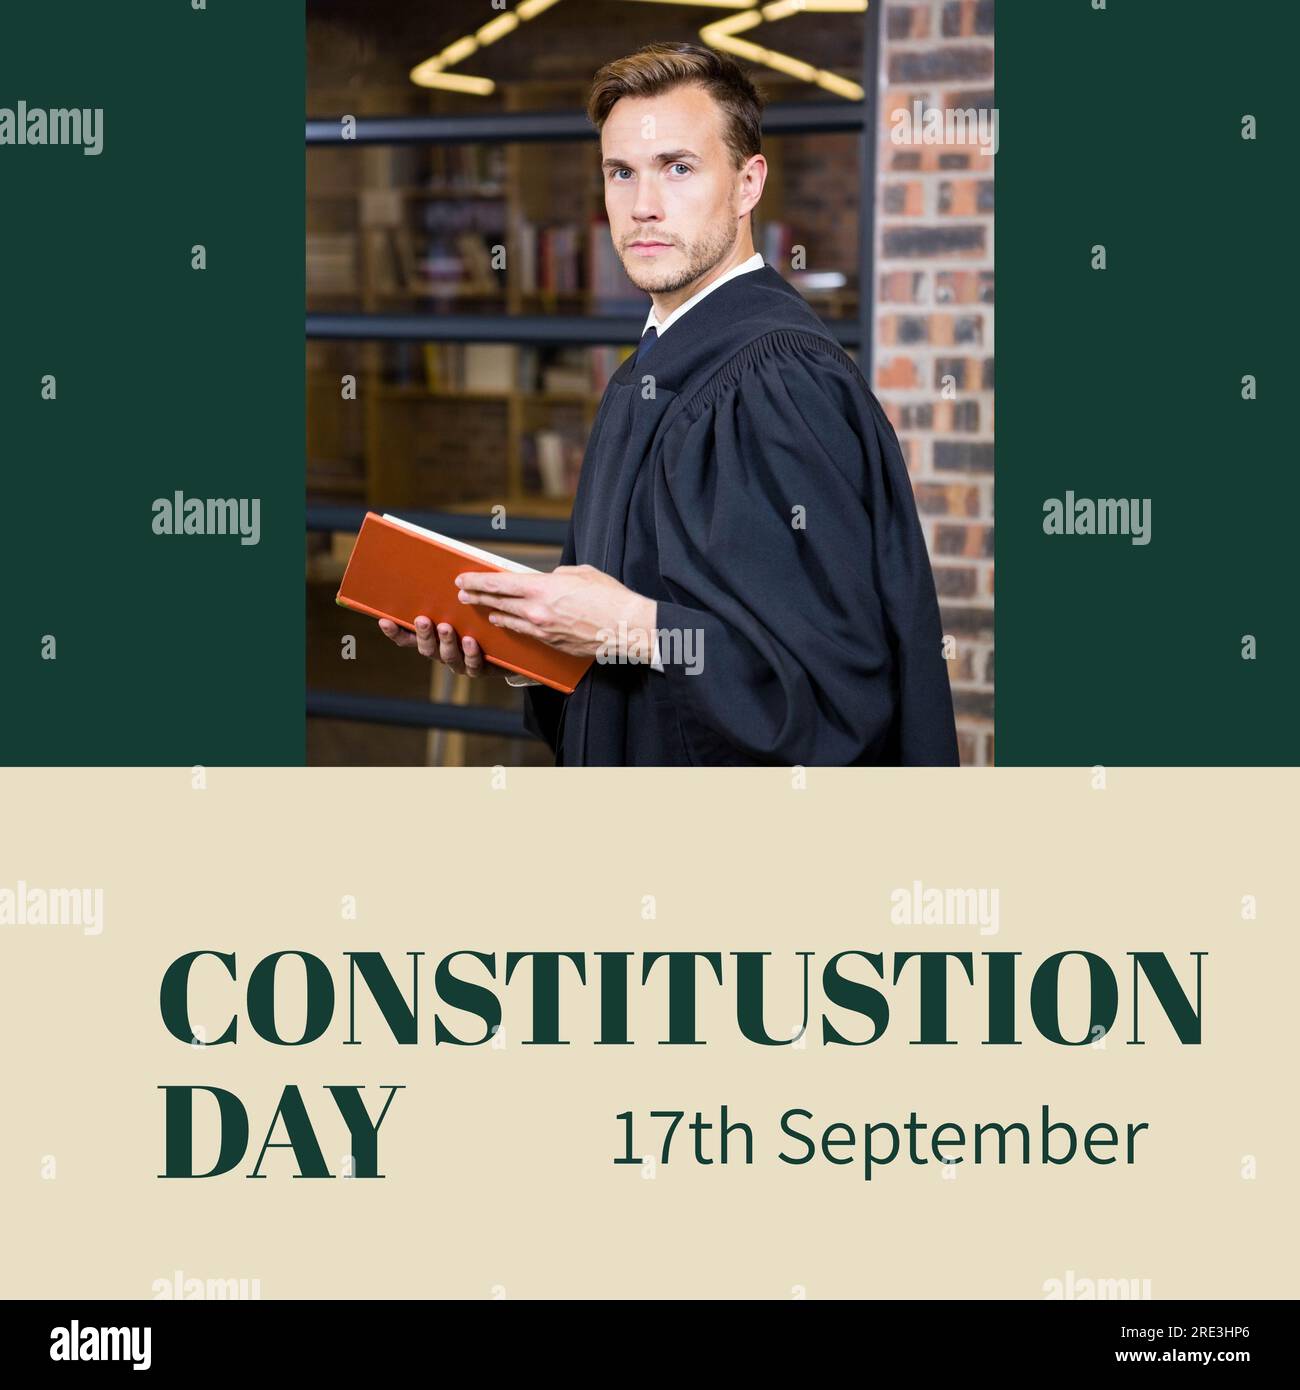 Constitution day text in green on beige and green with caucasian male attorney in gown with book Stock Photo